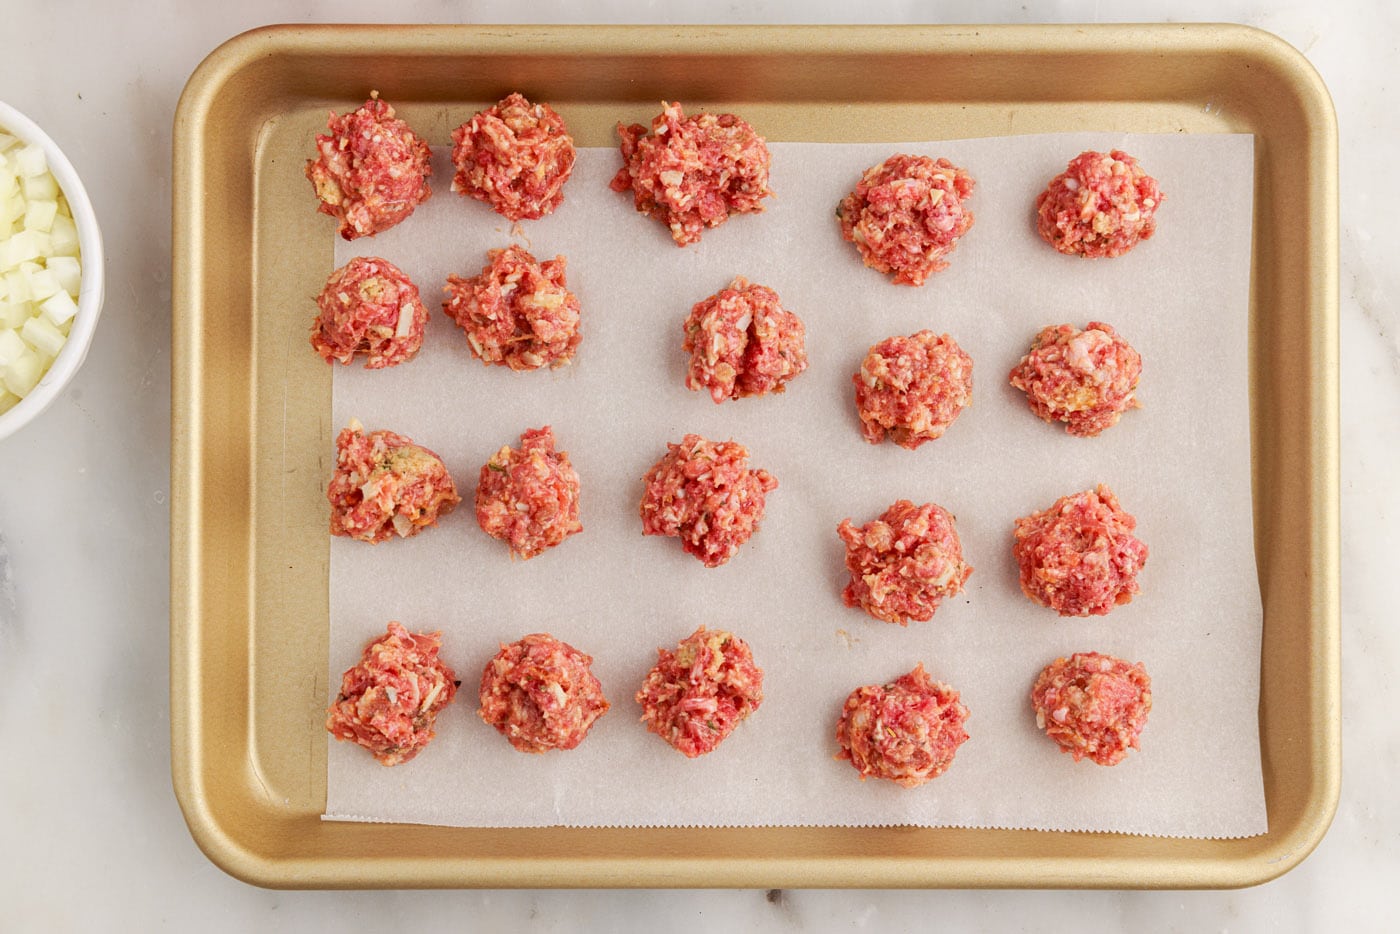 Italian sausage and ground beef meatballs on a baking sheet